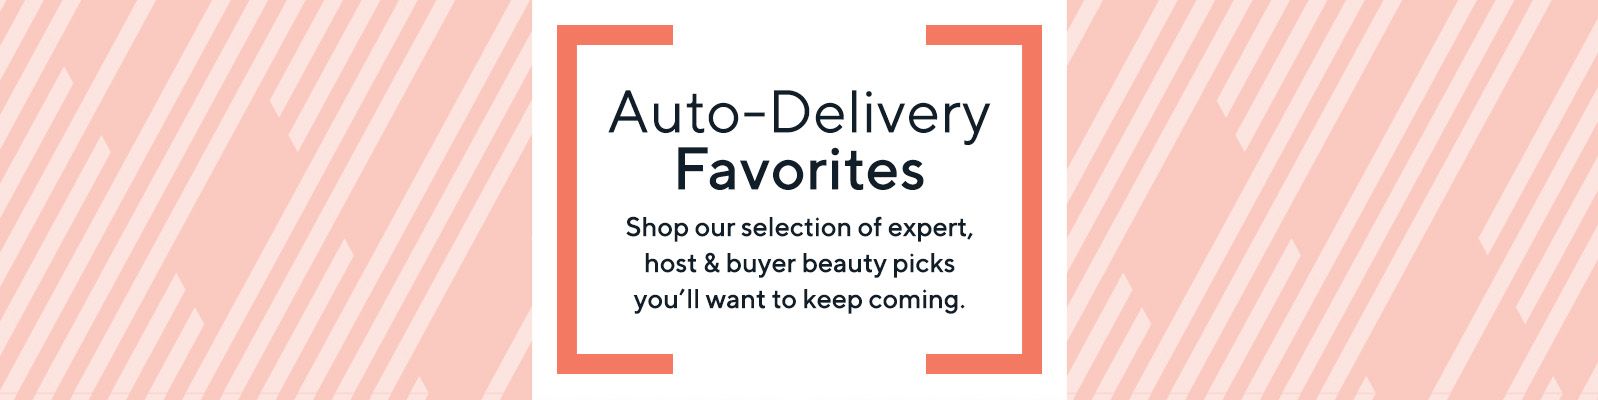 Auto-Delivery Favorites. Shop our selection of expert, host & buyer beauty picks you'll want to keep coming.